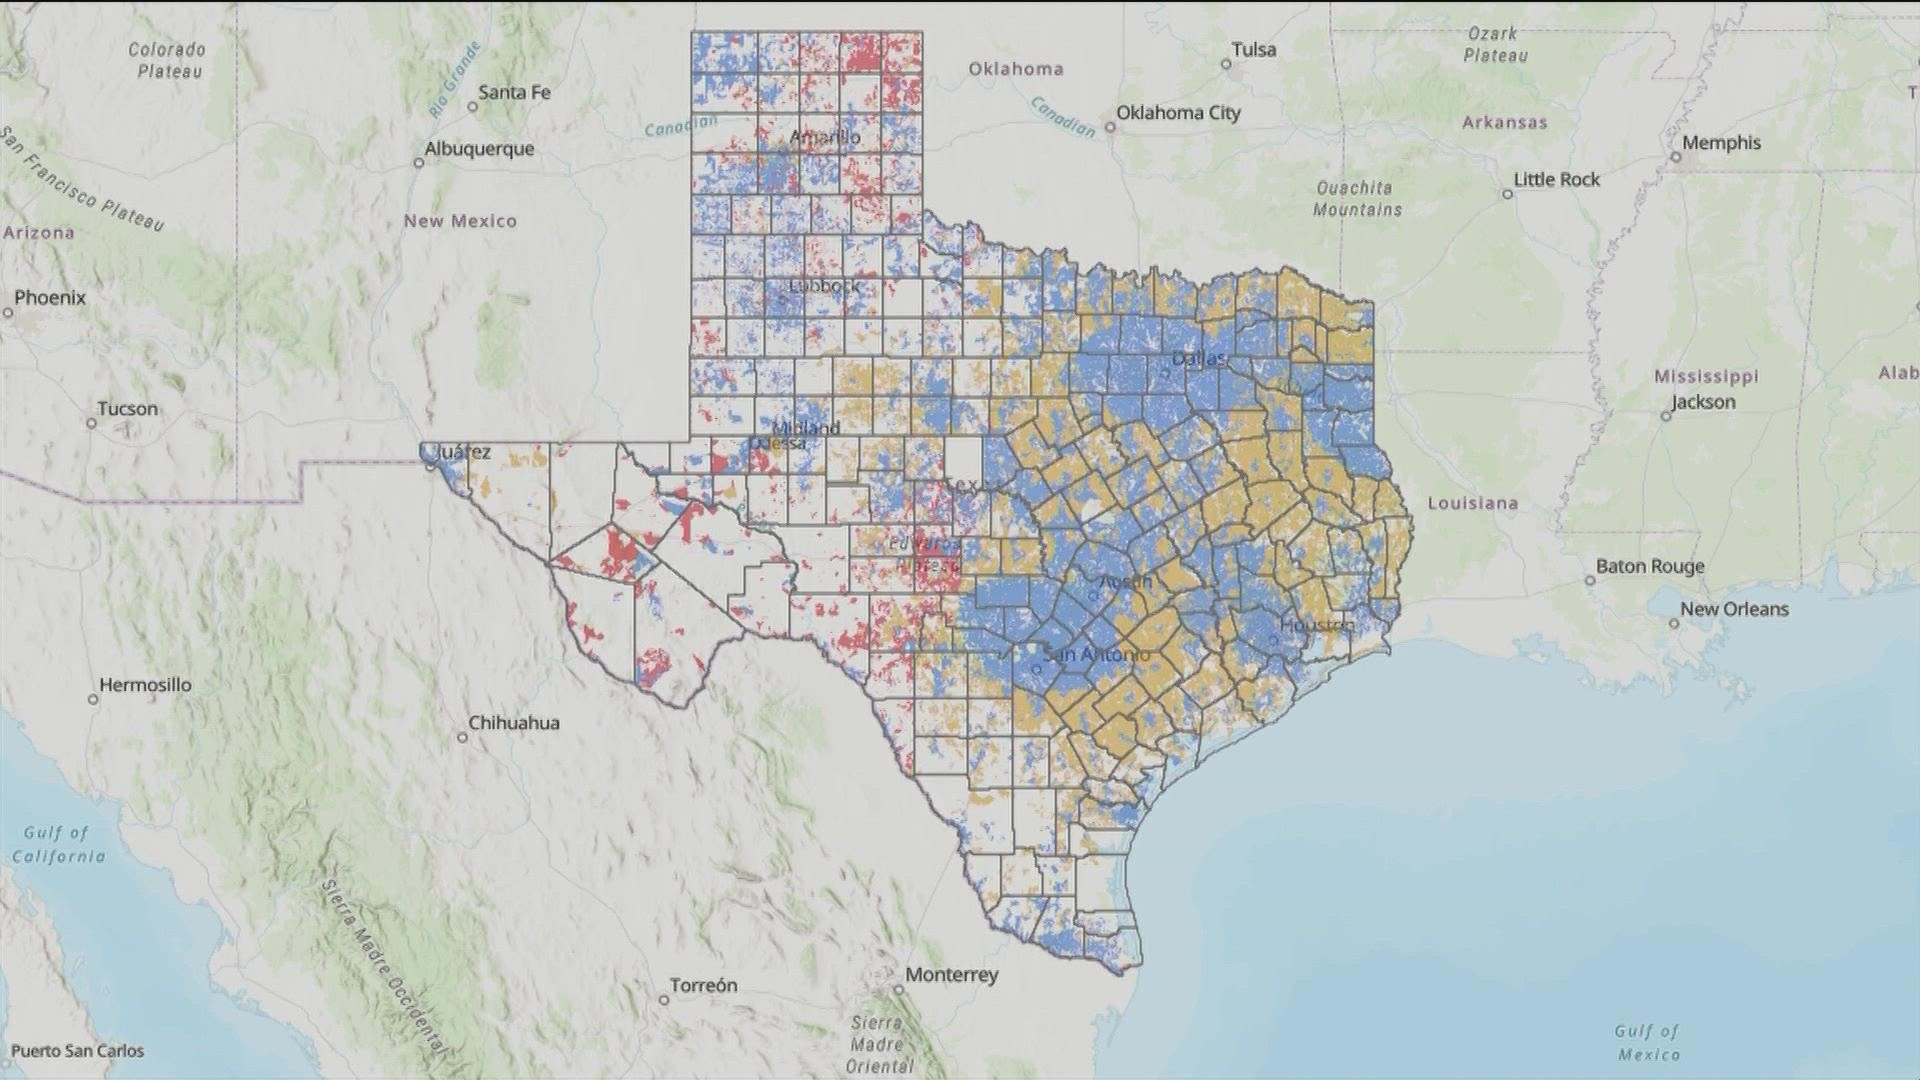 Hegar released the Texas Broadband Development Map as a way to help identify the areas of the state that can receive funding for broadband expansion projects.